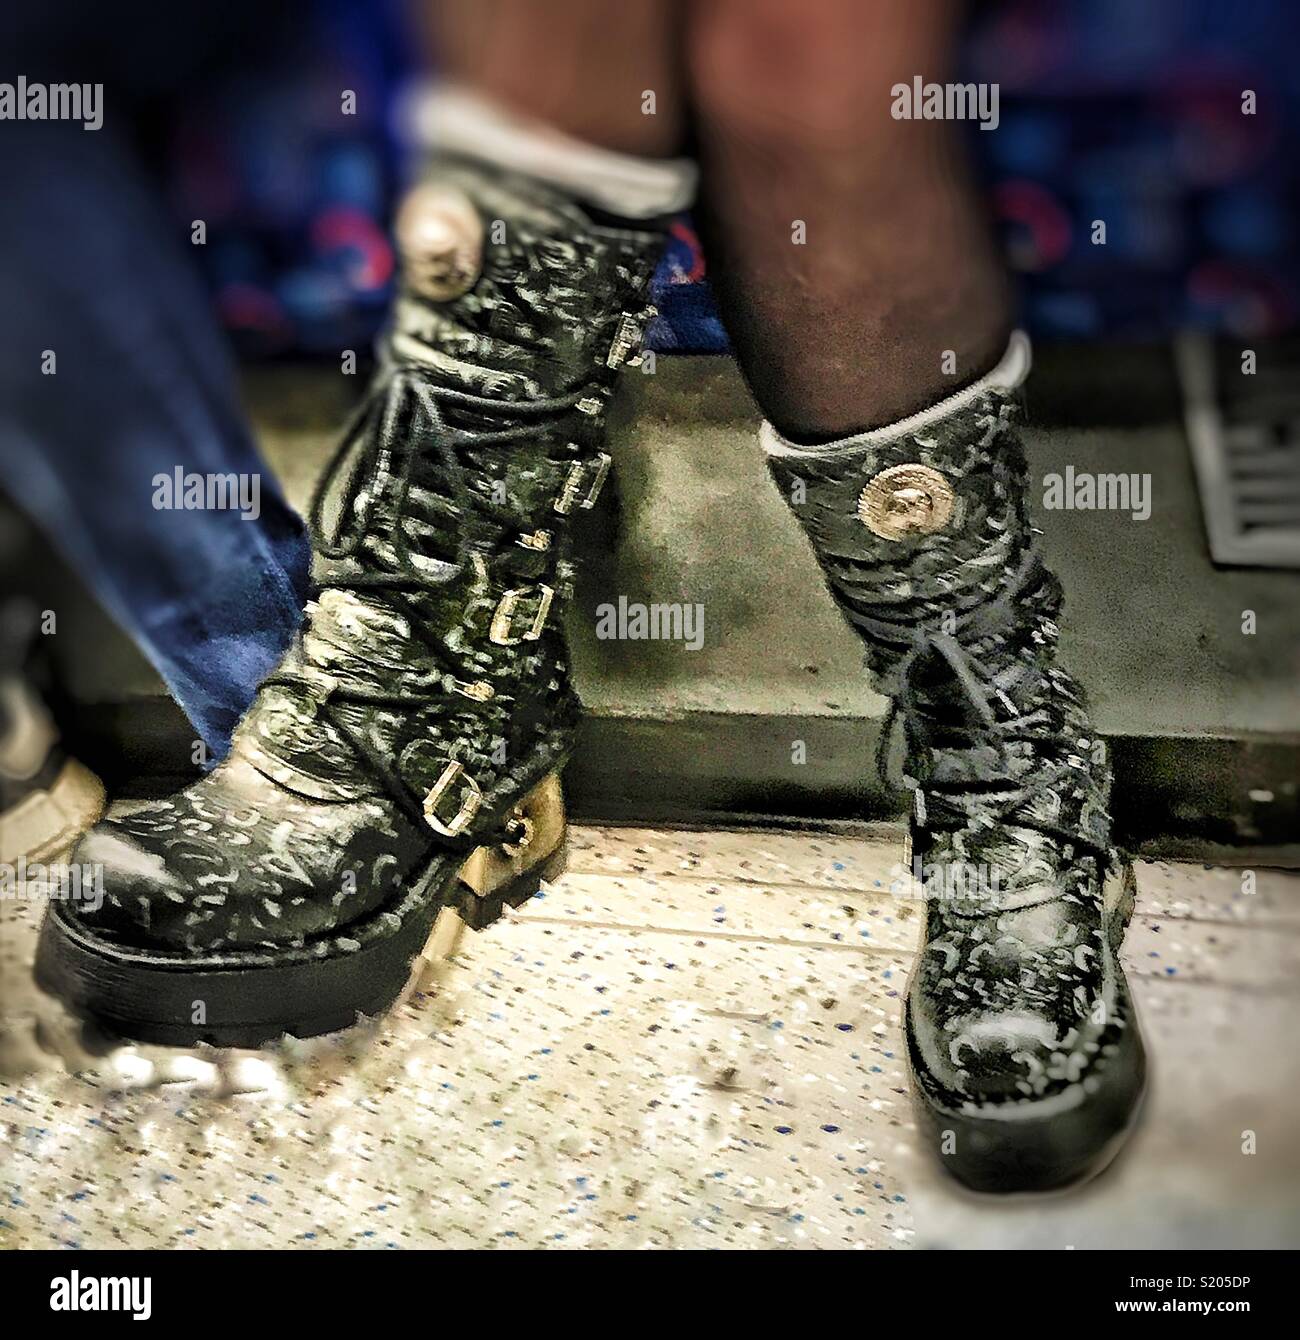 Punk style black fashion boots worn by a young lady on London Underground  Stock Photo - Alamy